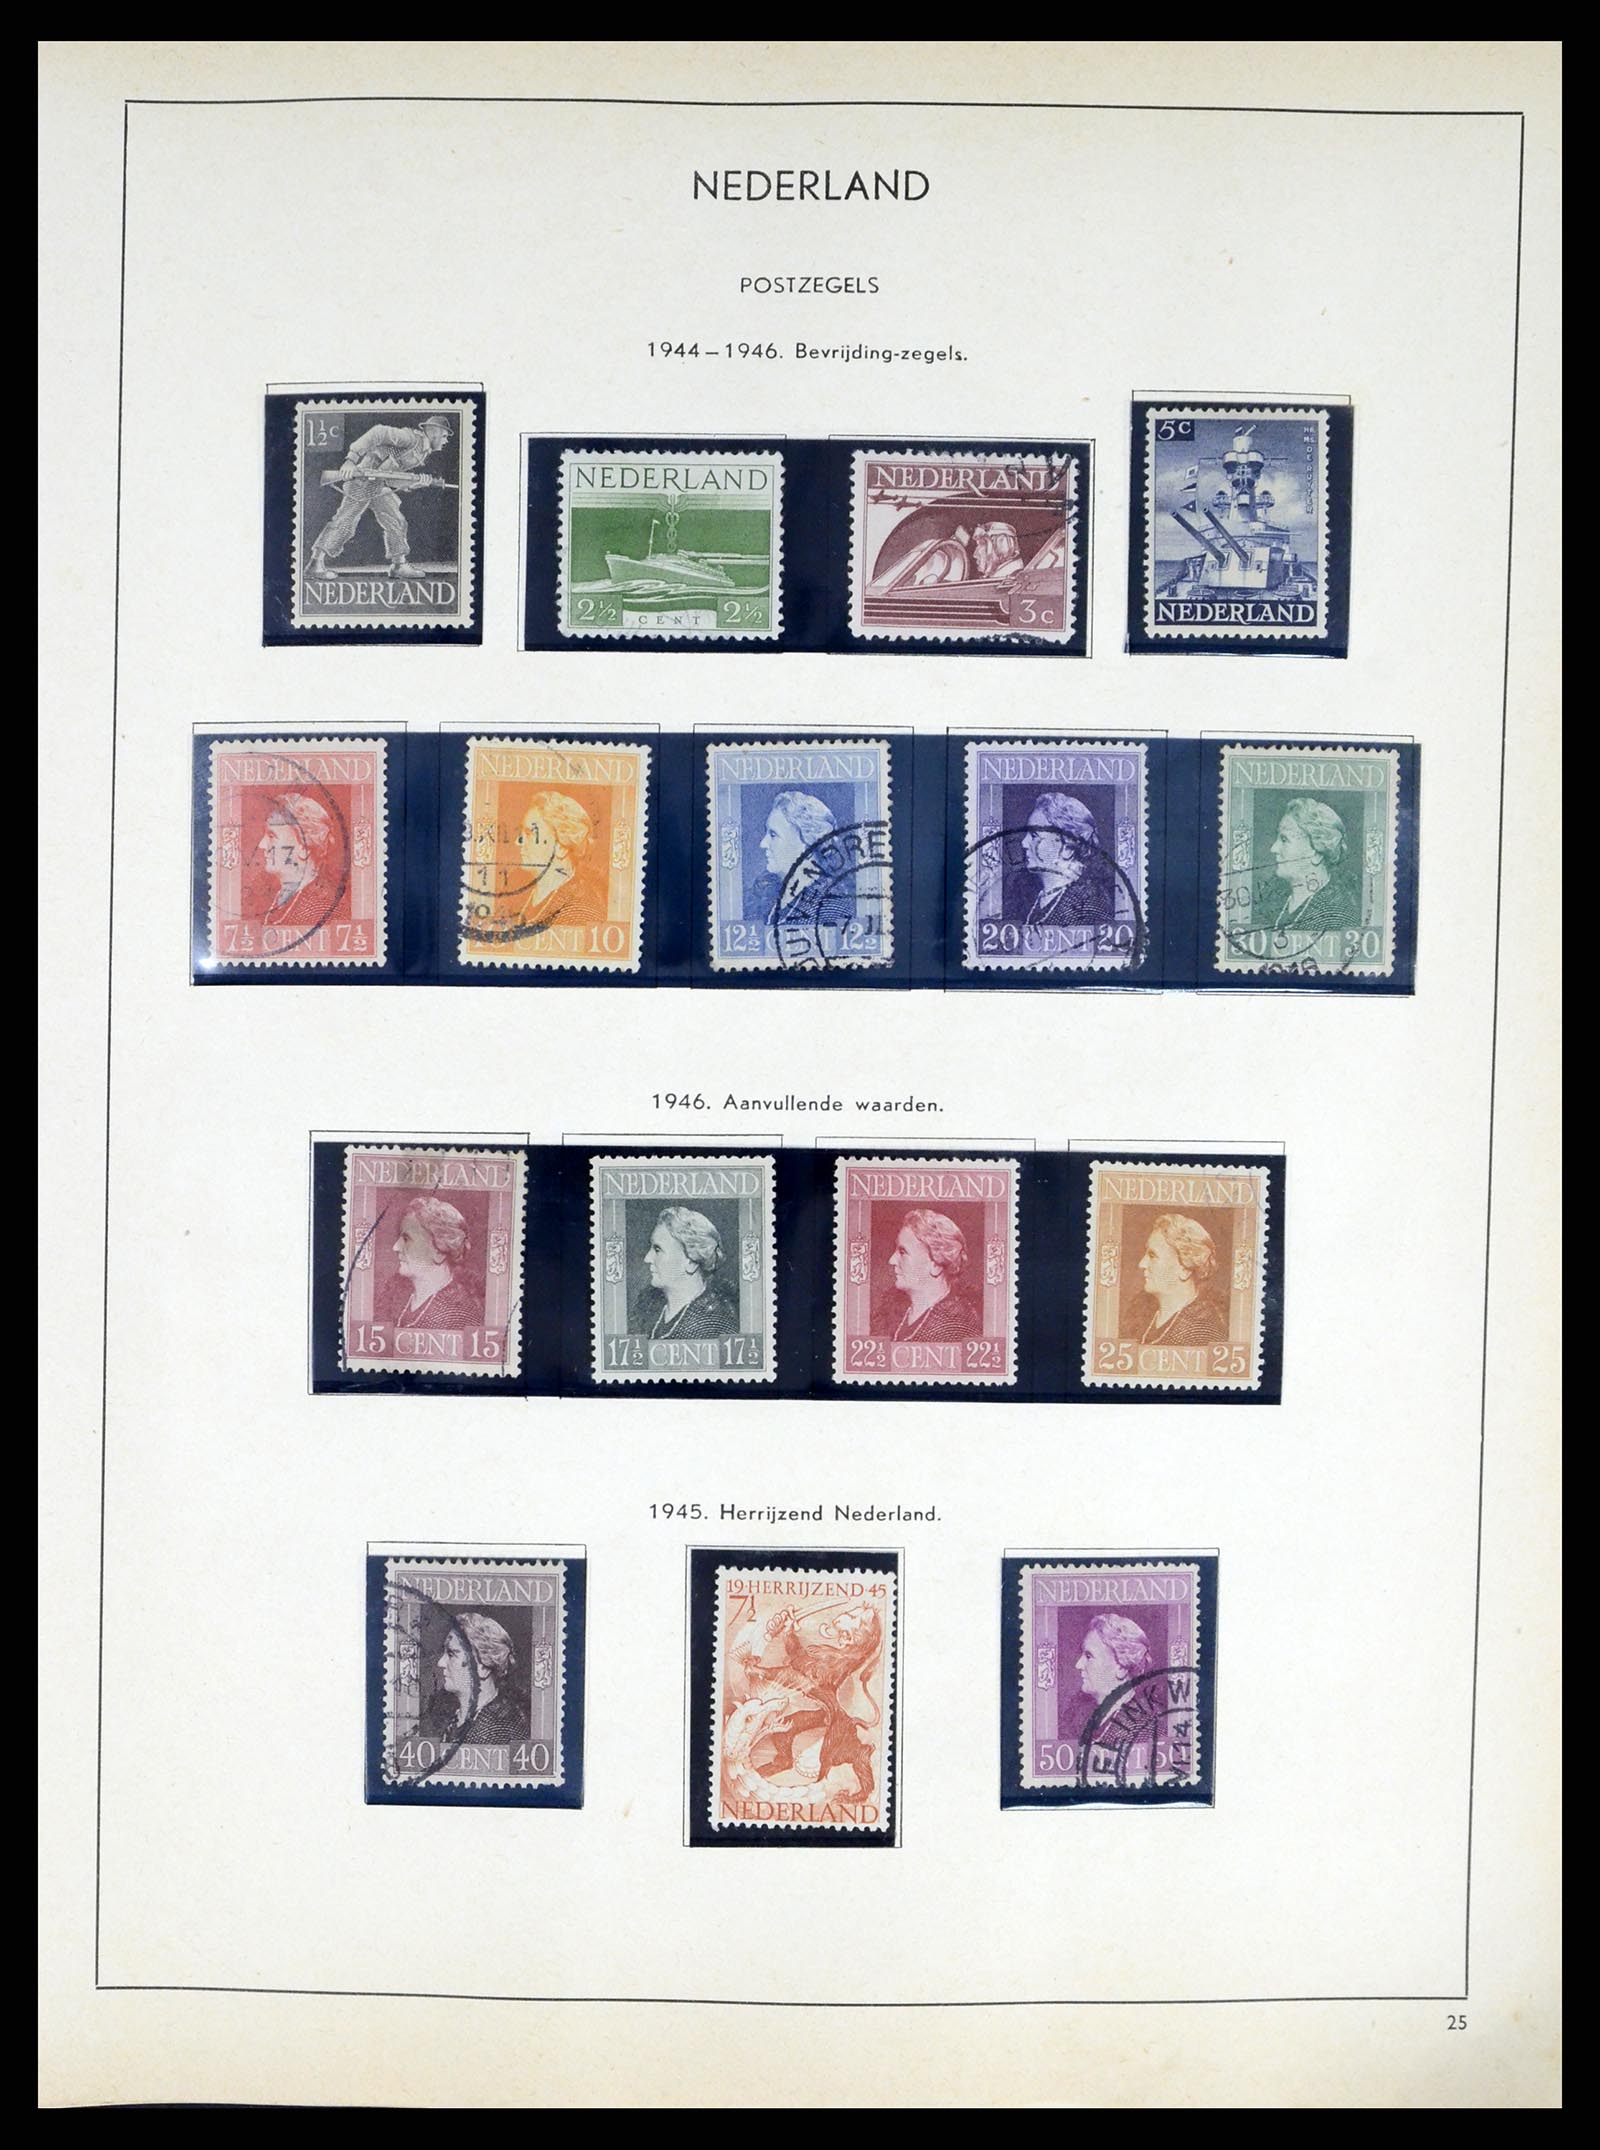 37618 020 - Stamp collection 37618 Netherlands and territories 1852-1972.